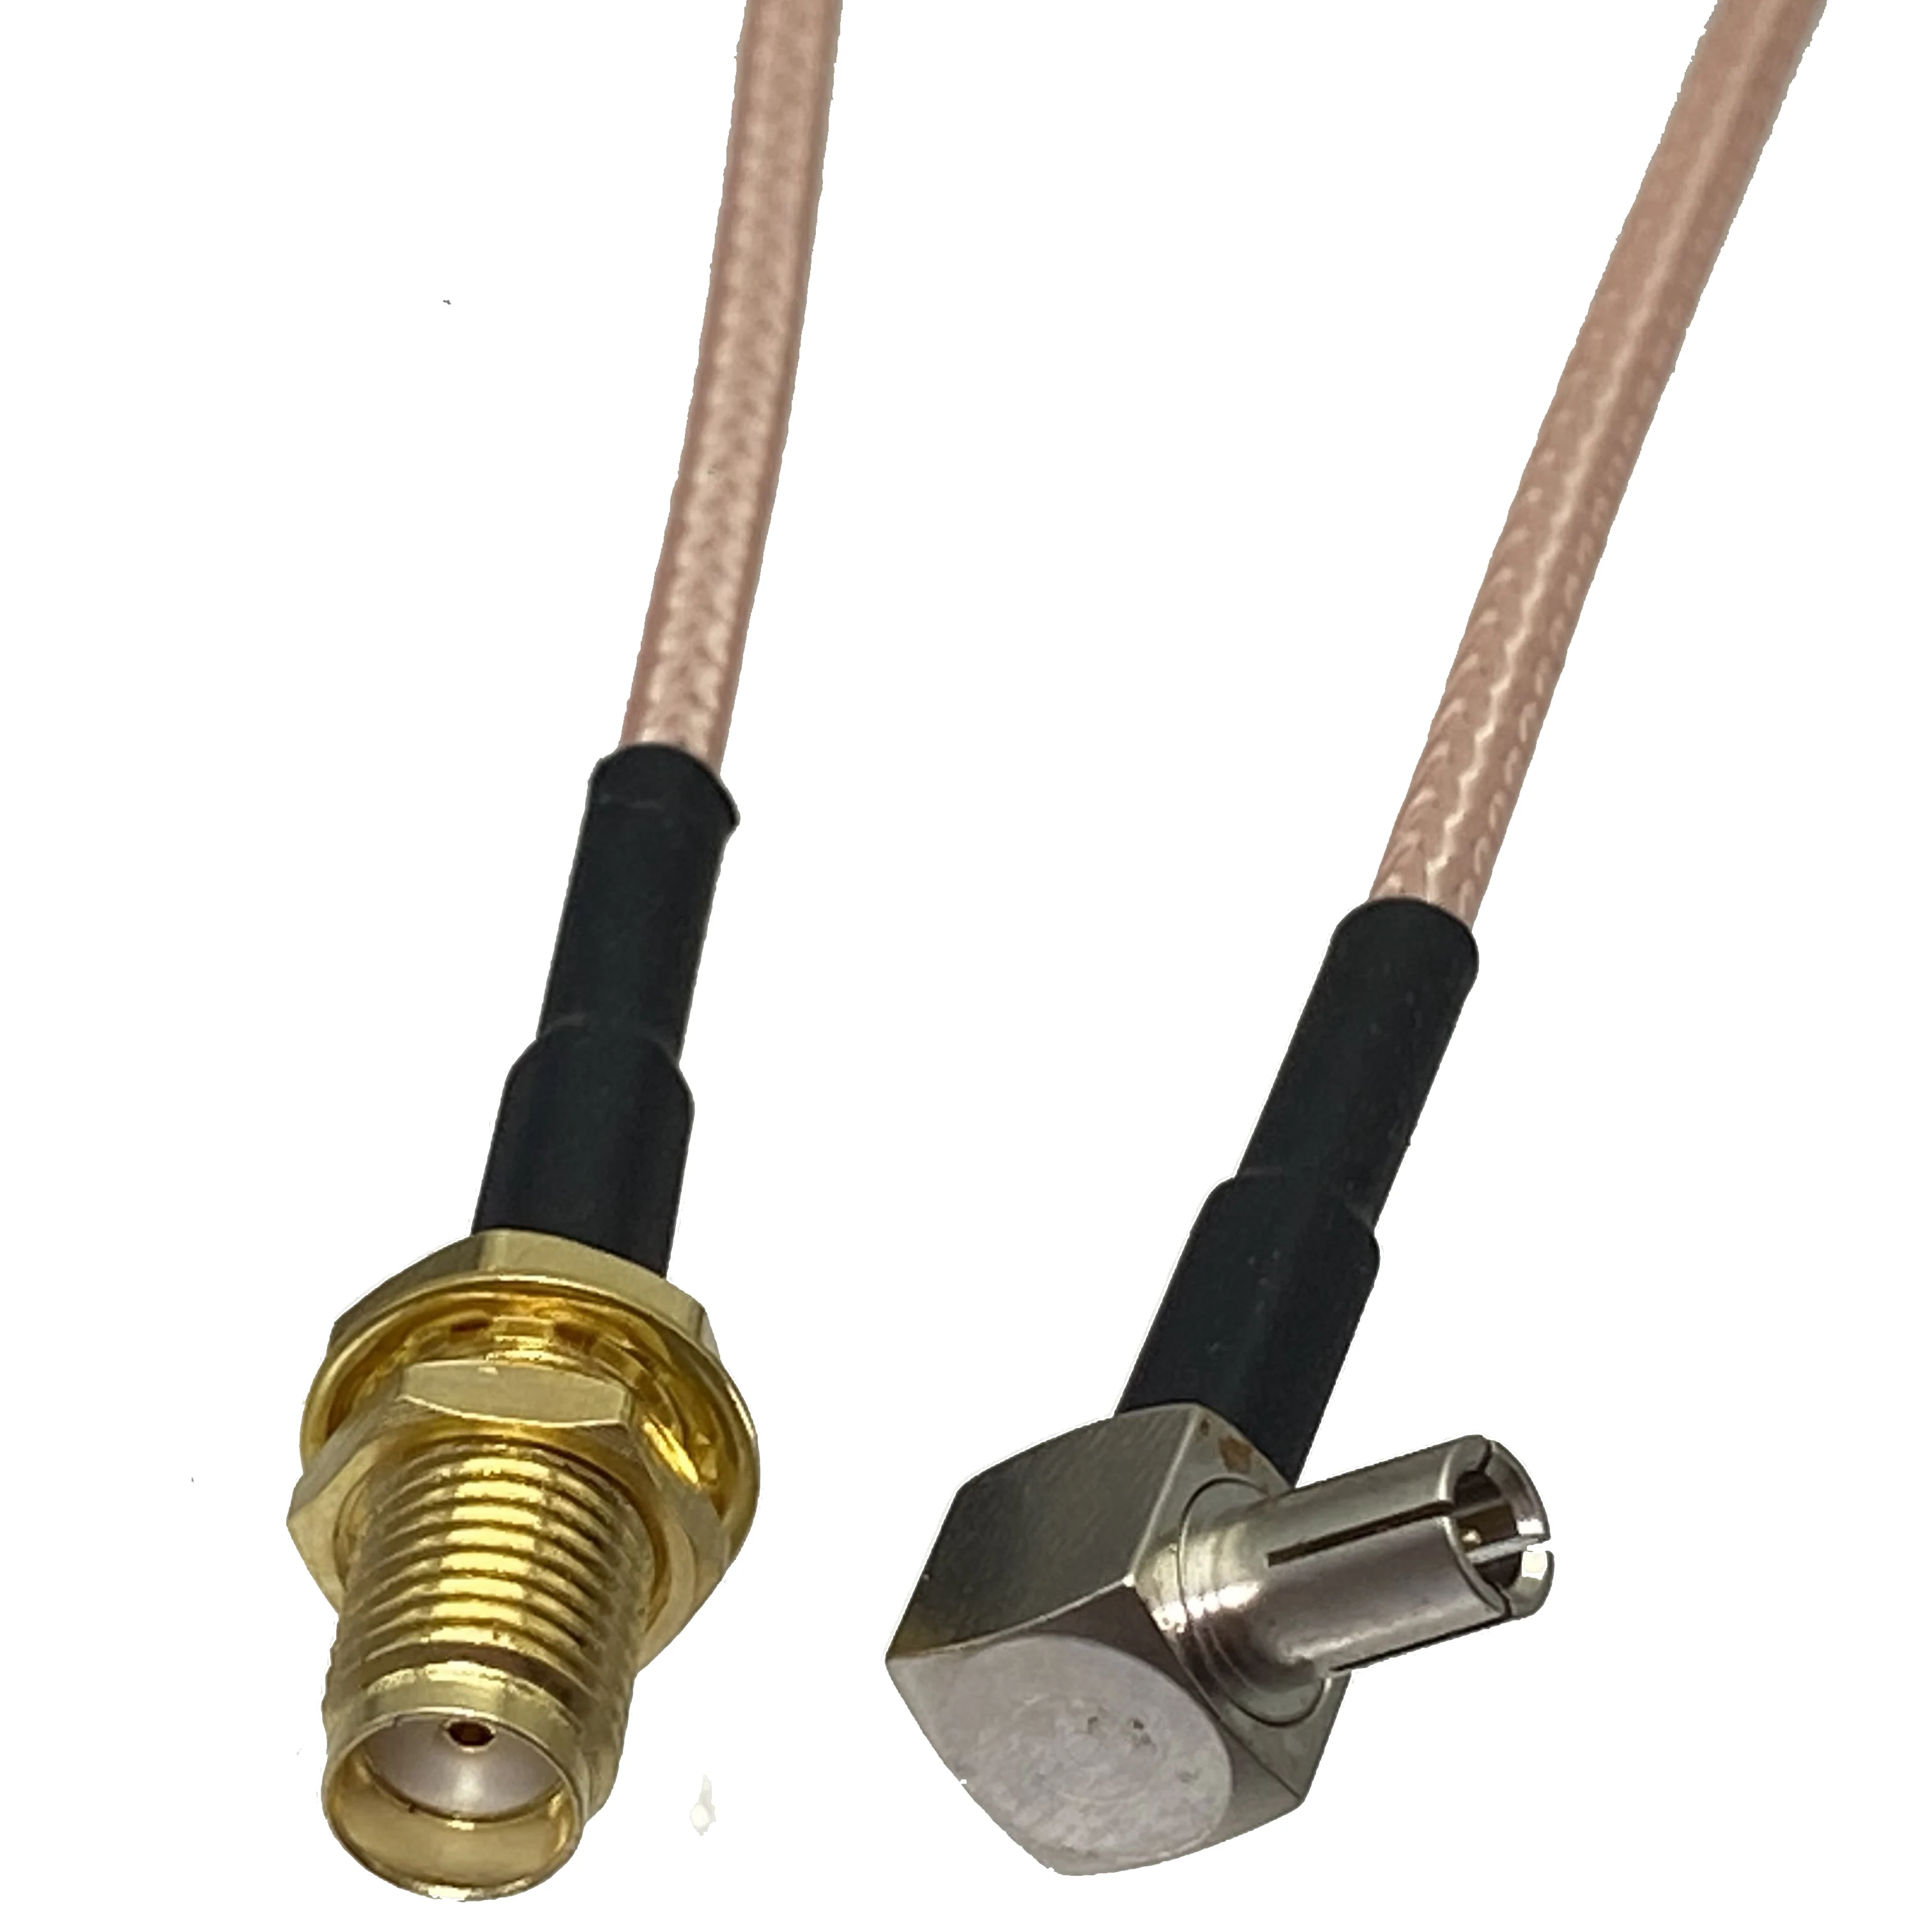 

RG316 Cable SMA Female Buklhead Jack to TS9 Male Plug Right Angle Crimp Connector RF Coaxial Pigtail Jumper Wire 4inch~10FT